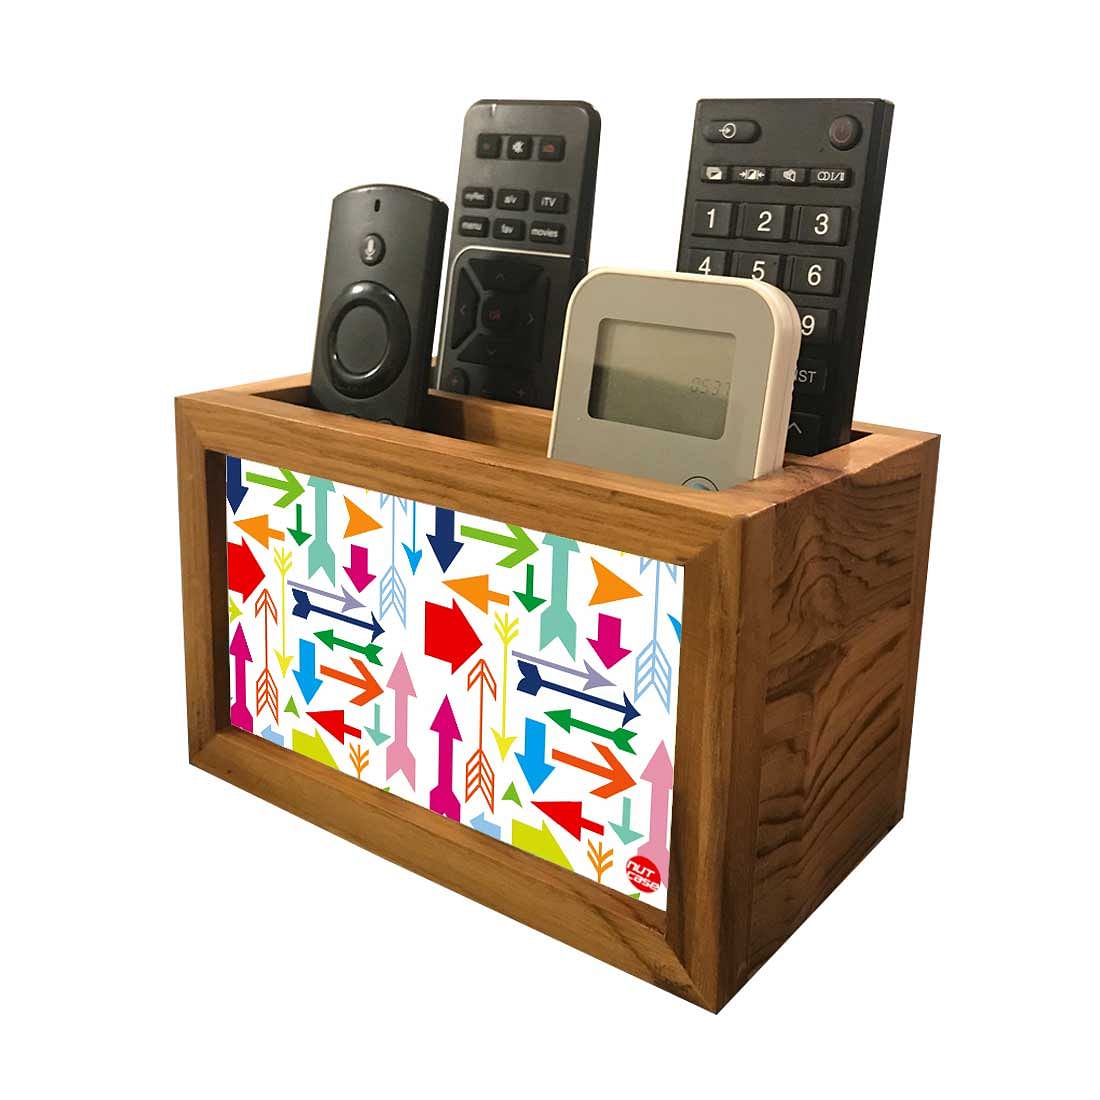 Remote Control Stand Holder Organizer For TV / AC Remotes -  Colorful Arrows Nutcase